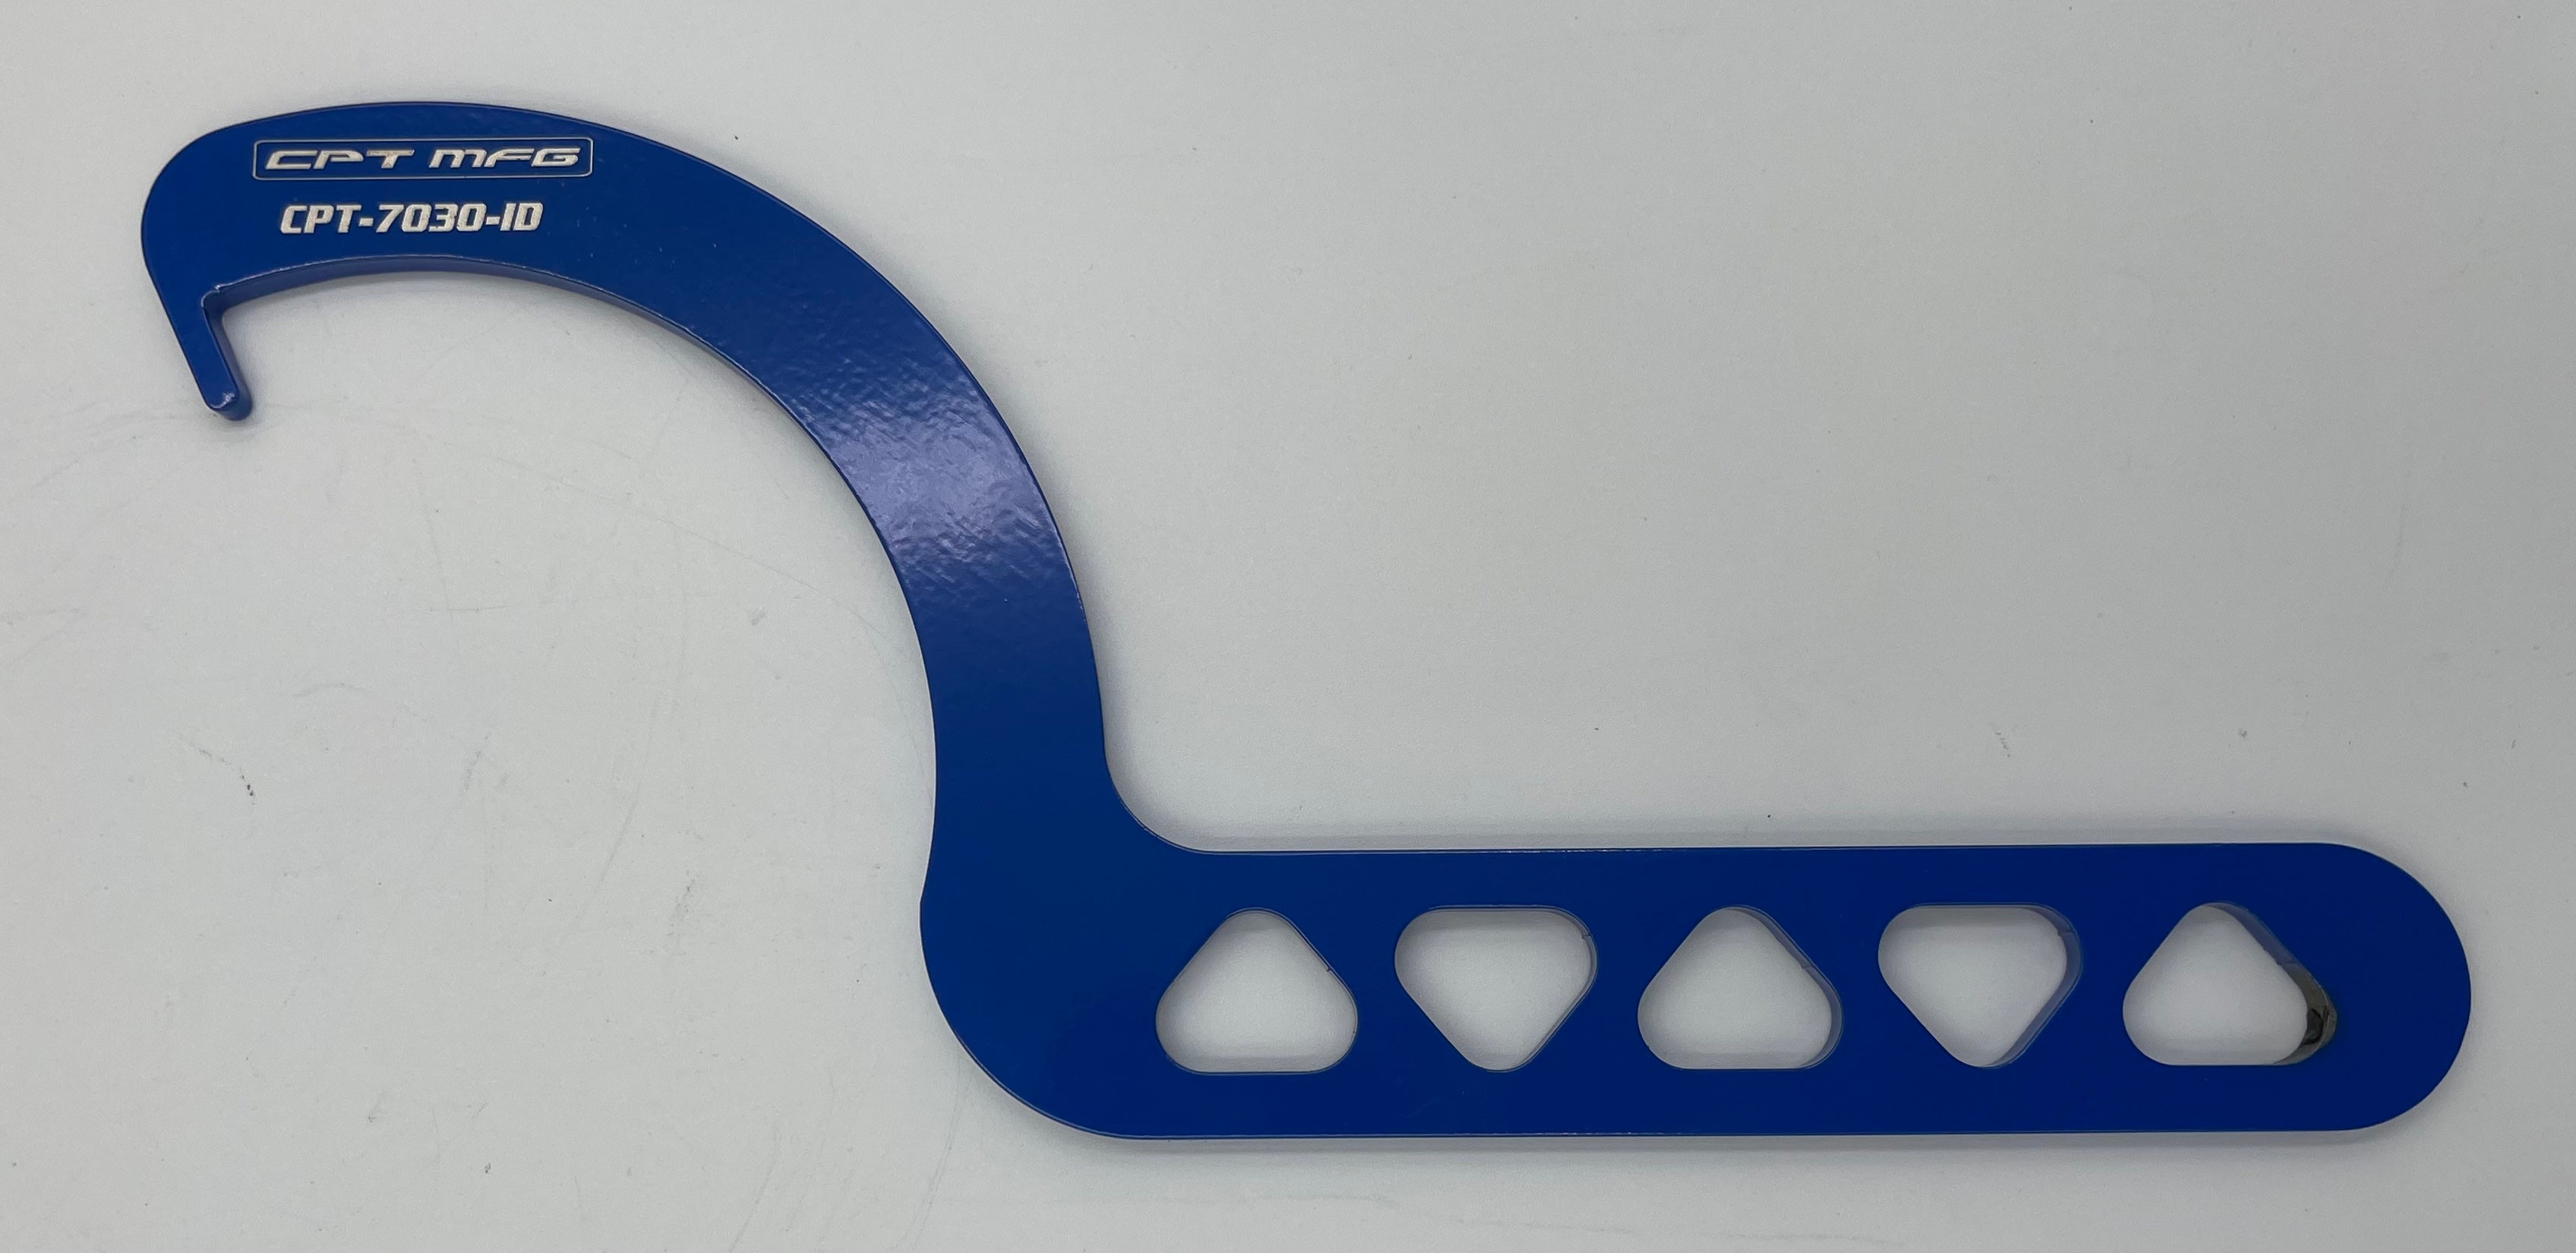 COIL OVER 5 INCH ID CUP WRENCH - Part#: CPT-7030-ID